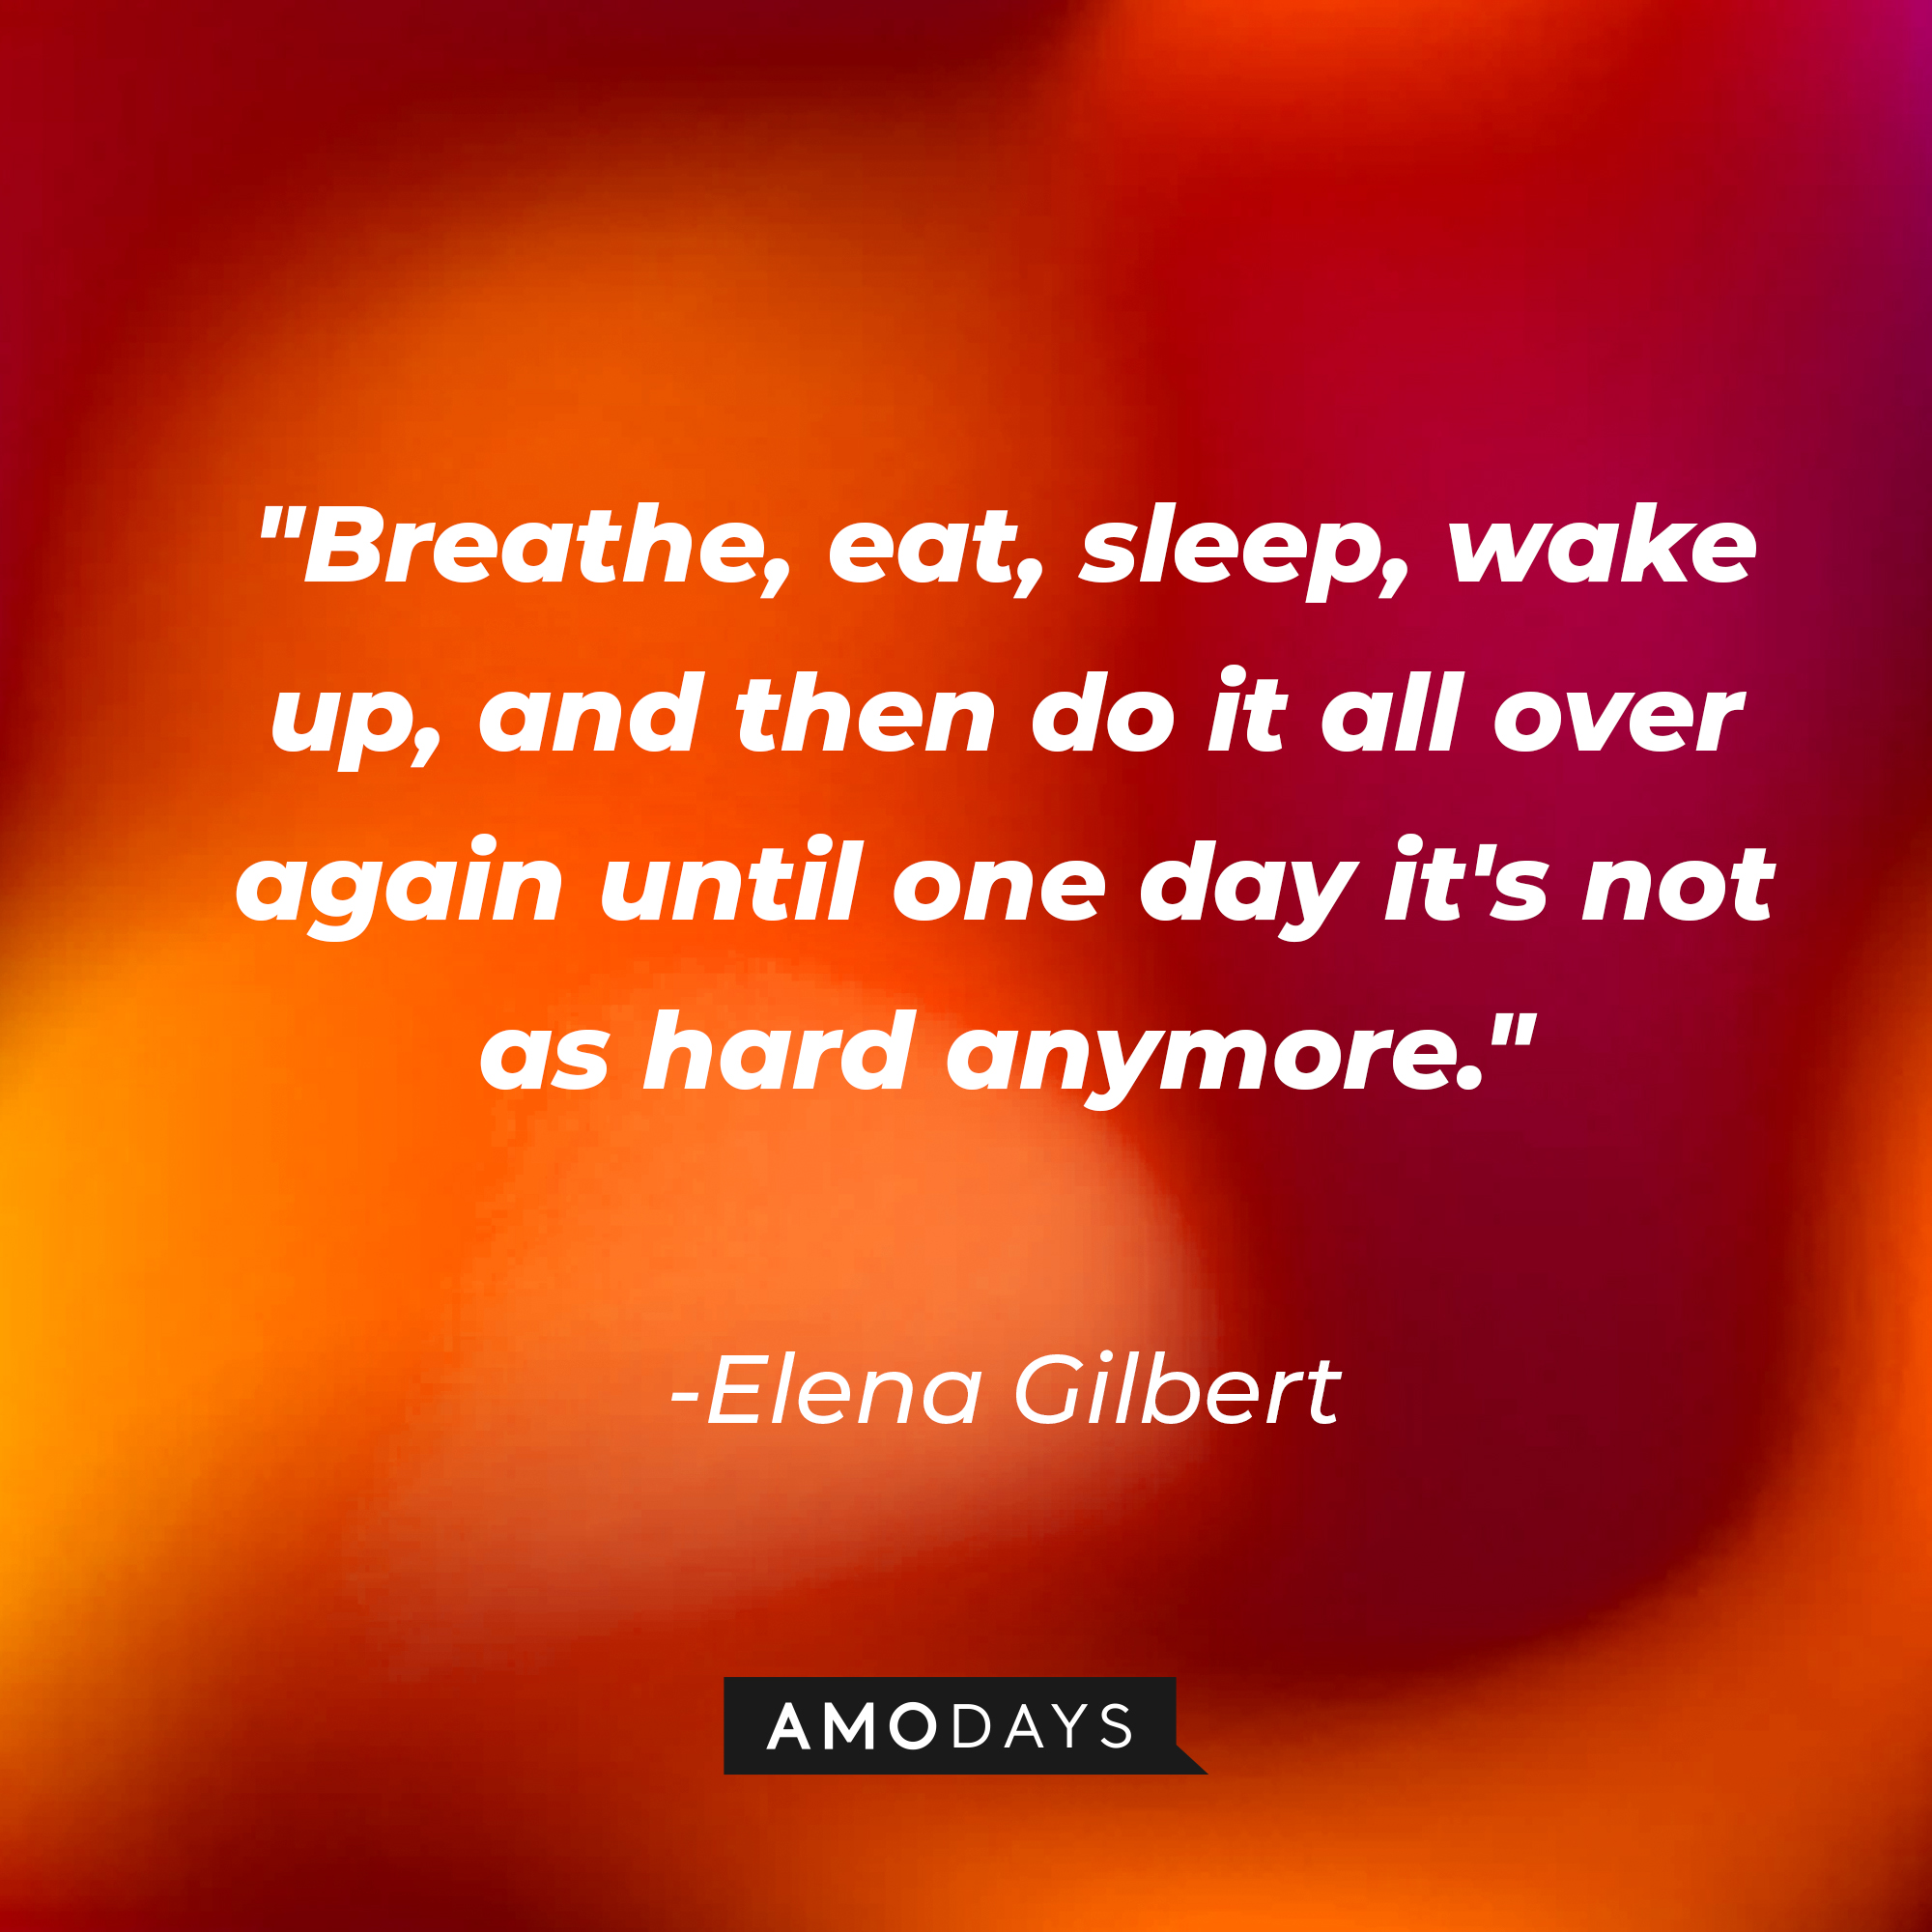 Elena Gilbert's quote: "Breathe, eat, sleep, wake up, and then do it all over again until one day it's not as hard anymore." | Image: AmoDays